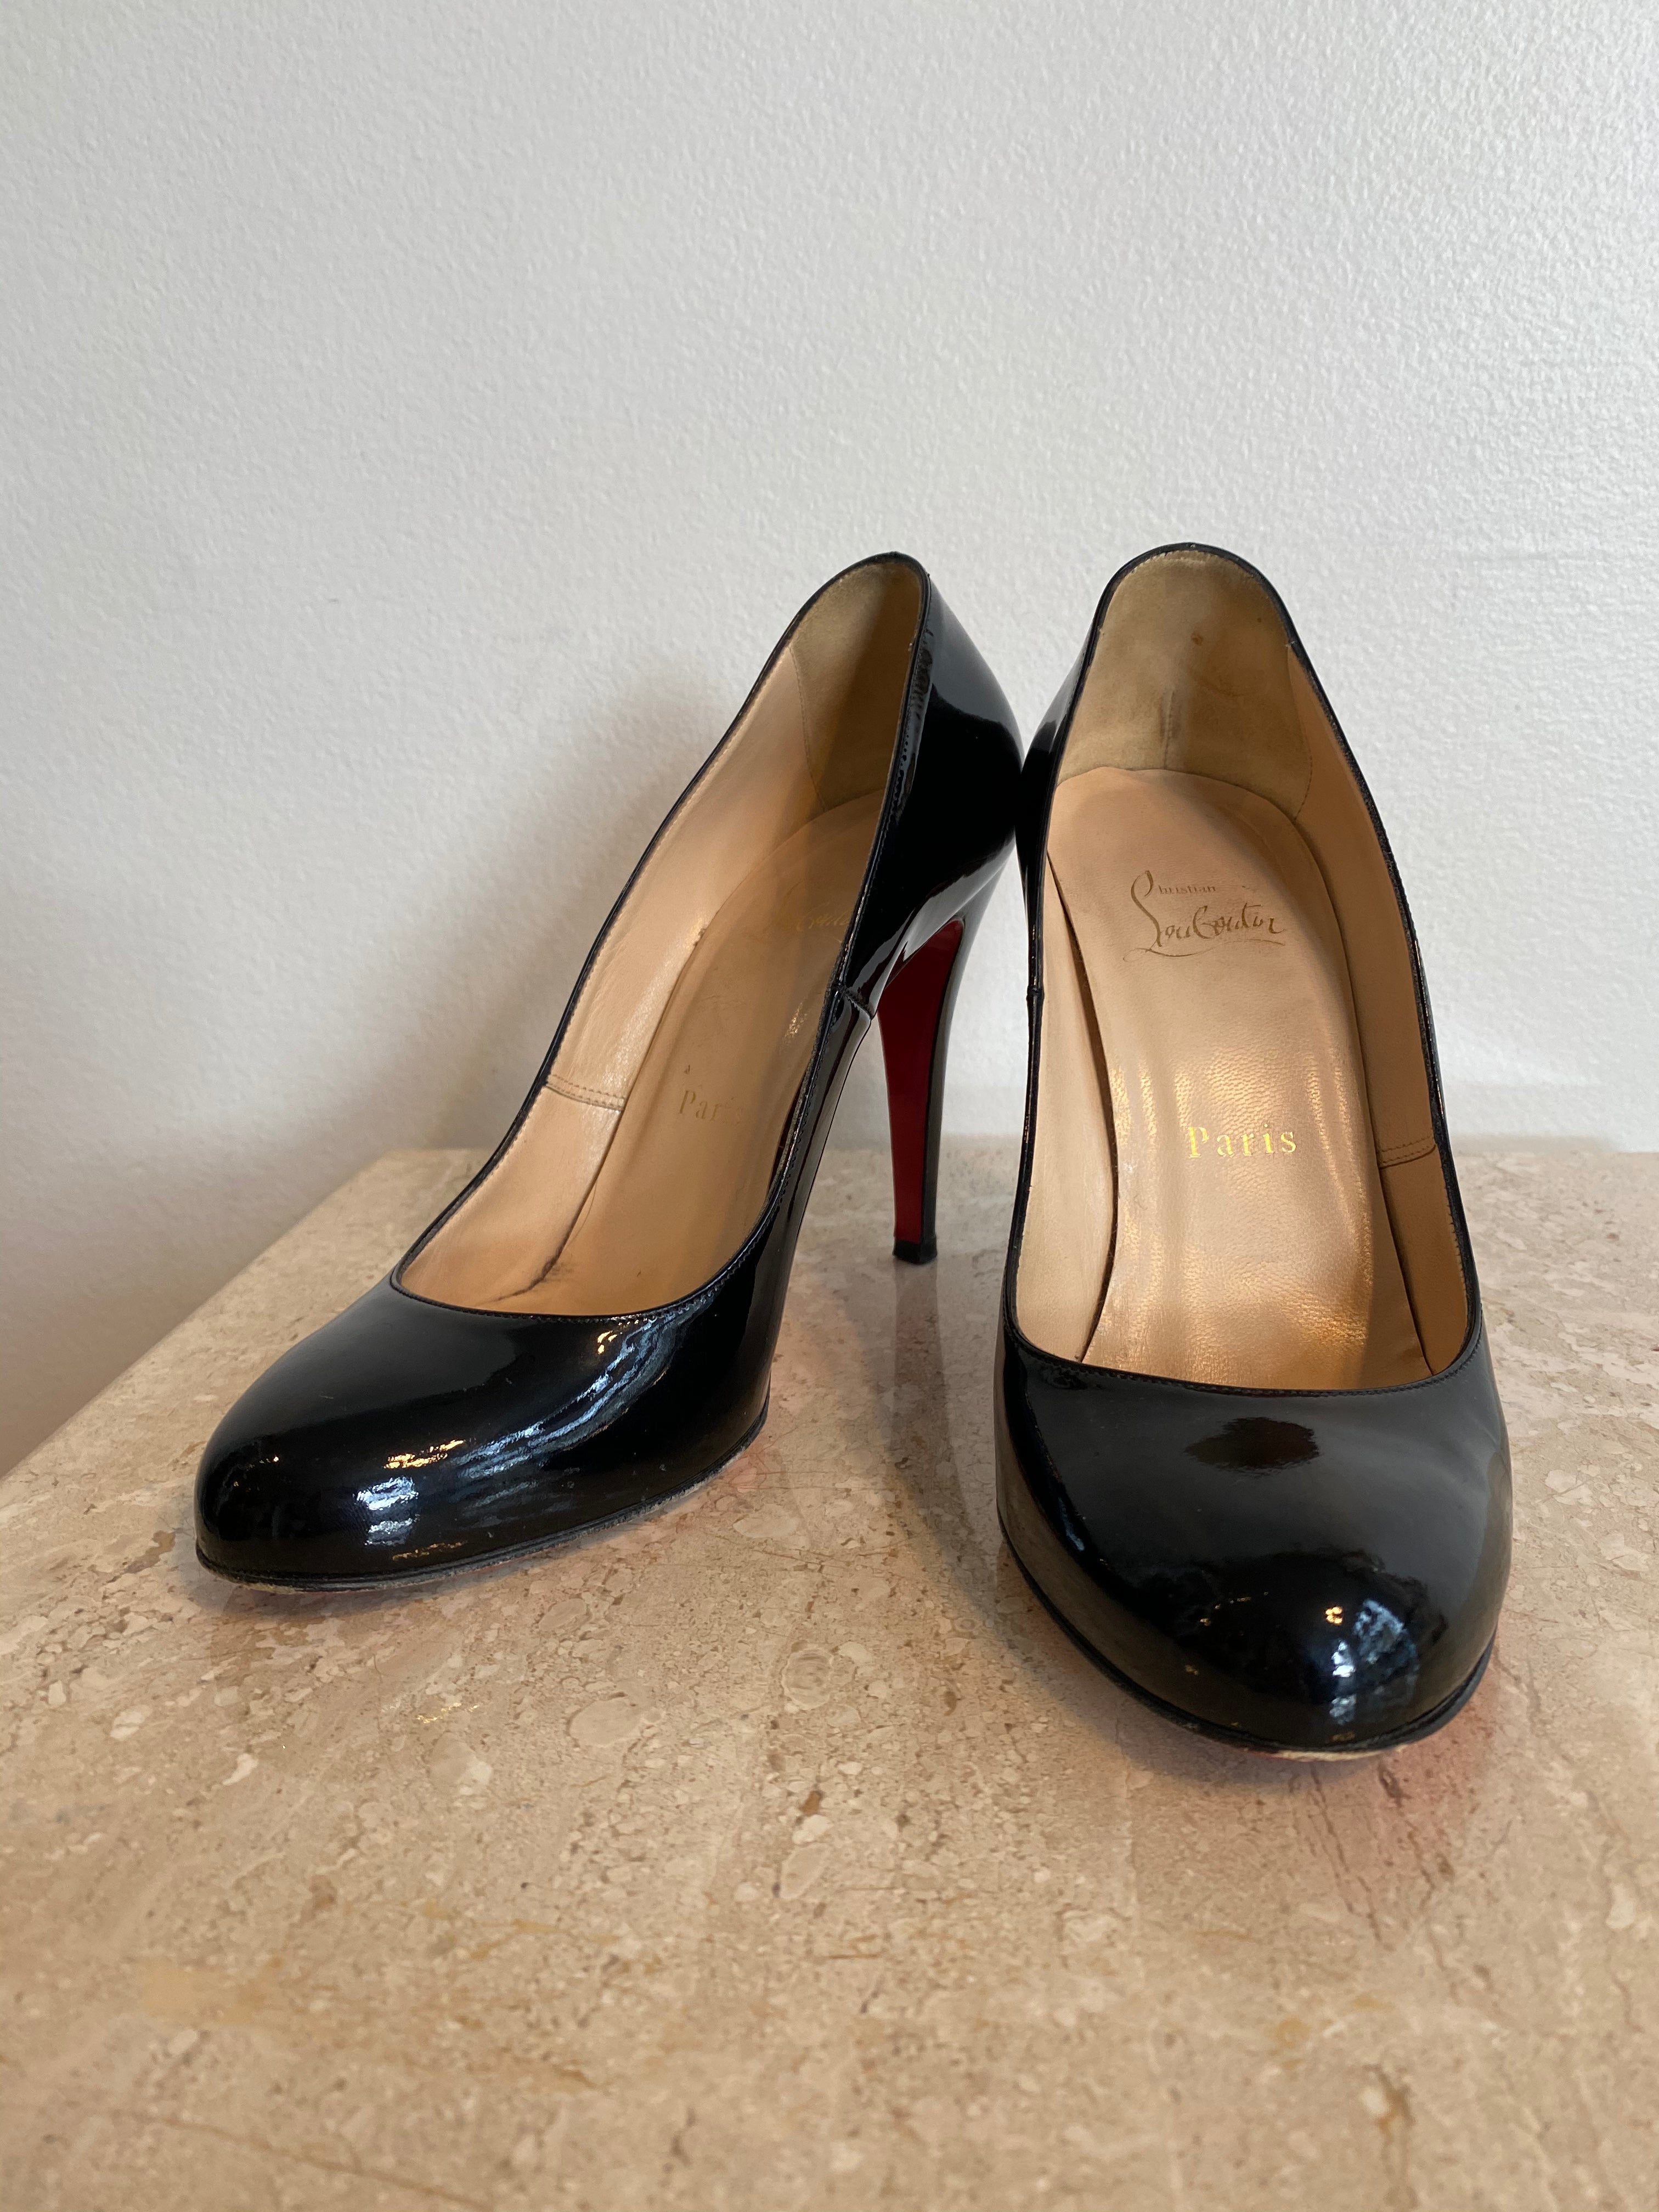 Pre-Owned CHRISTIAN LOUBOUTIN Black Patent Ron Ron 100mm - Size 37.5